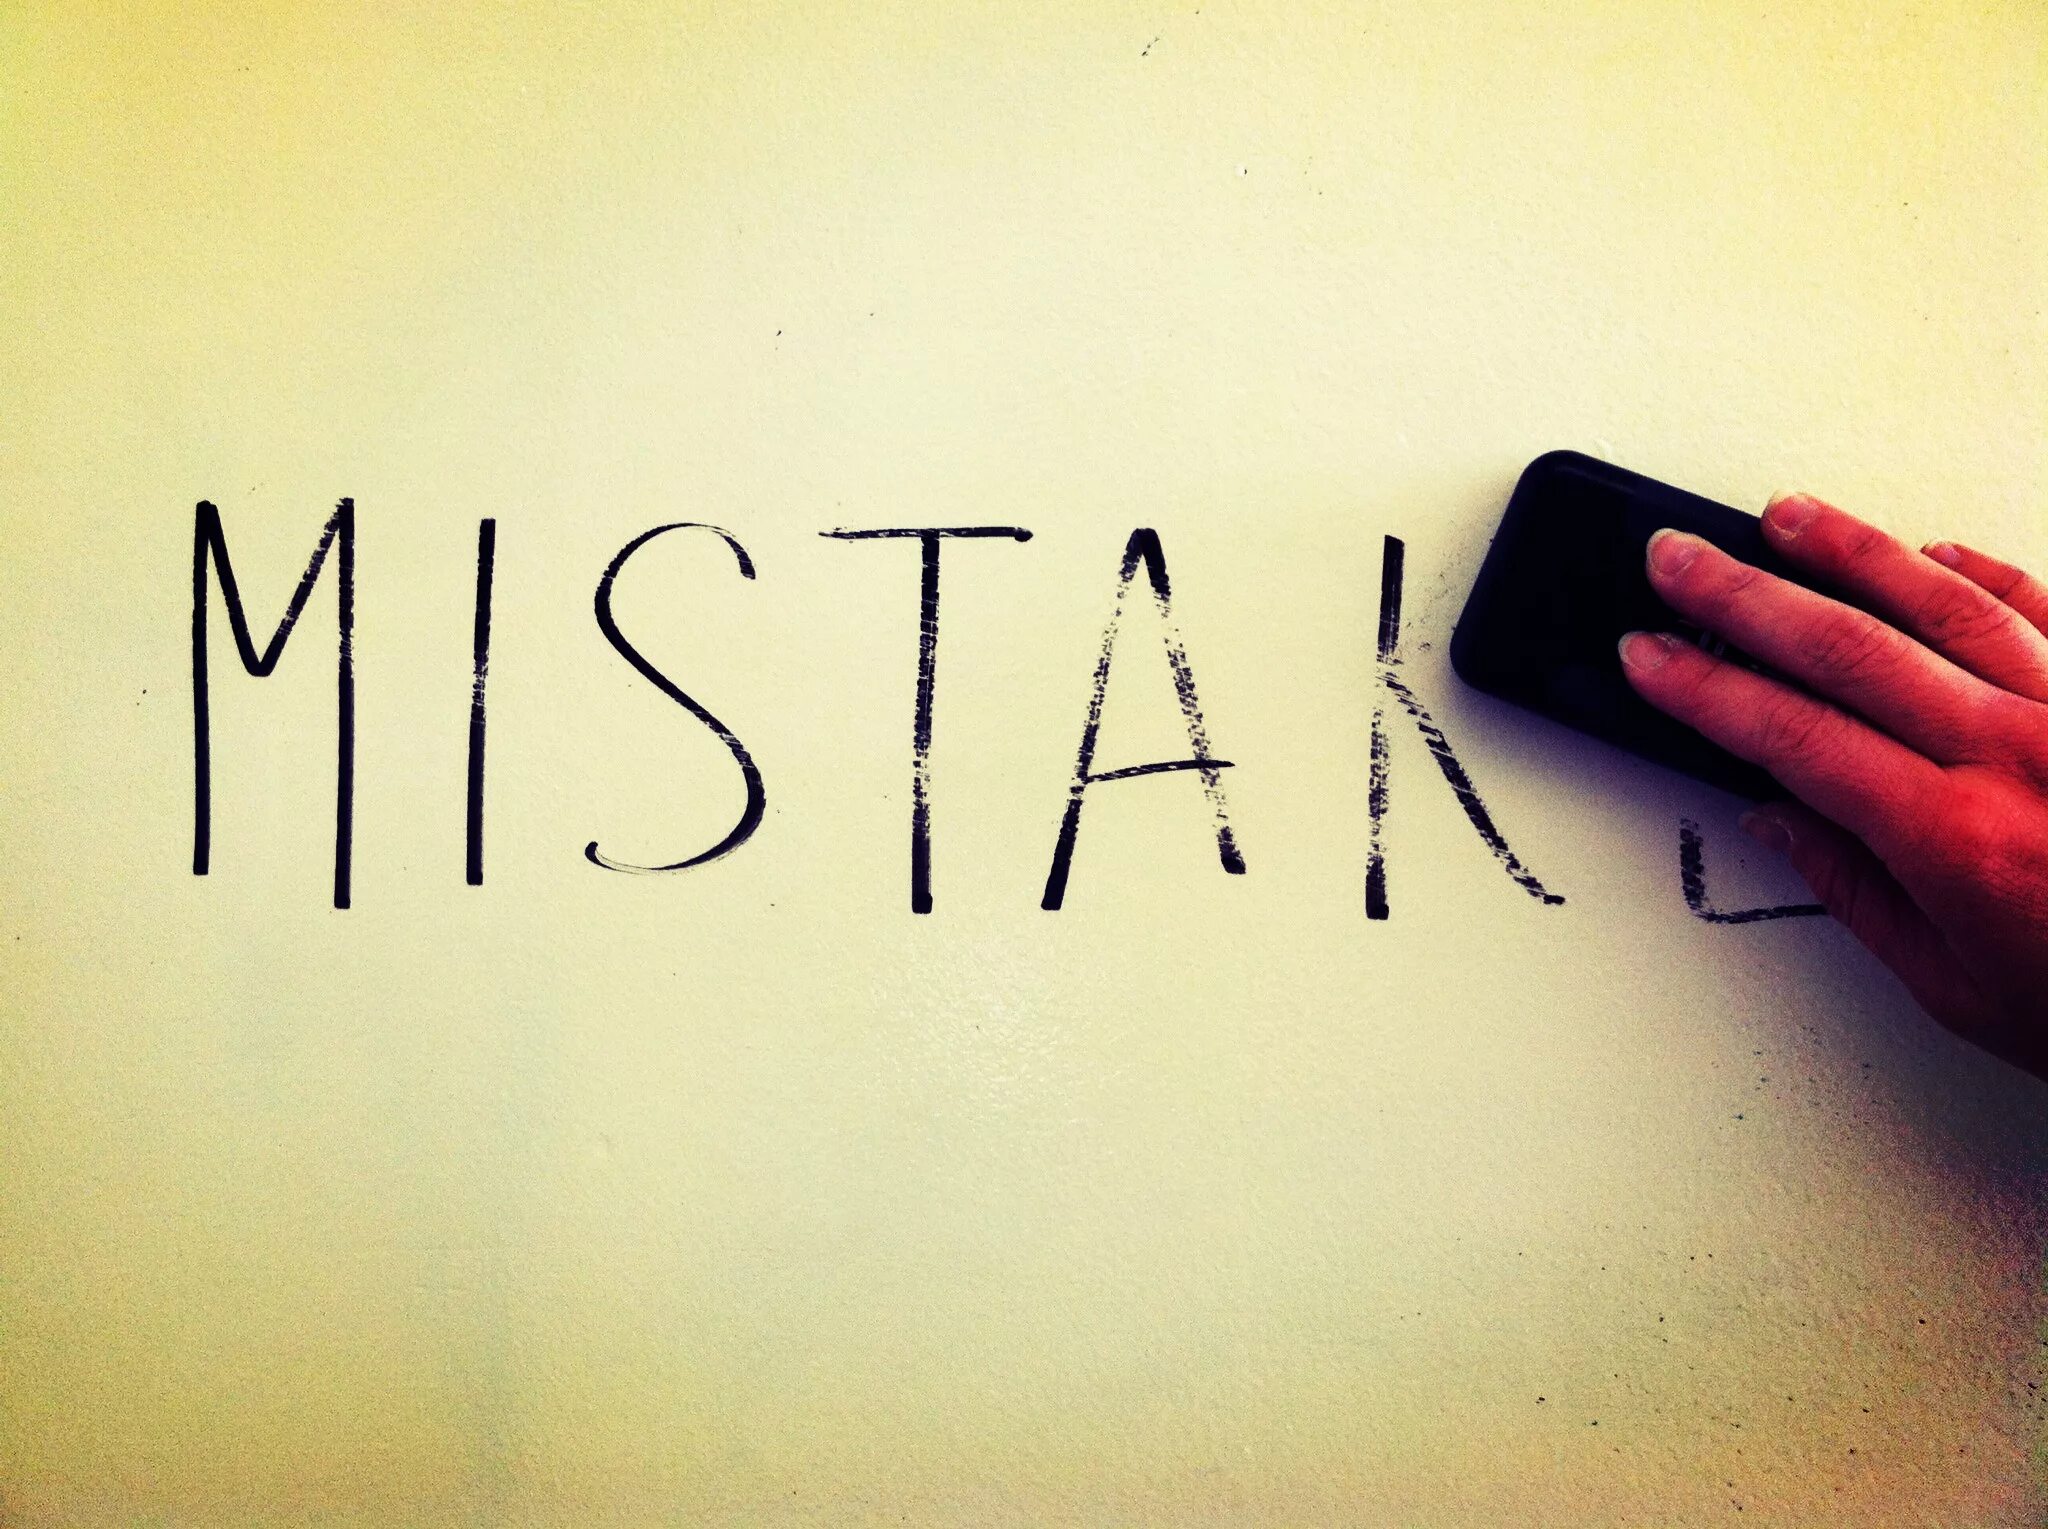 Mistakes картинки. Mistake рисунок. Make a mistake картинка. Make a mistake картинки для презентации. Where is the mistake